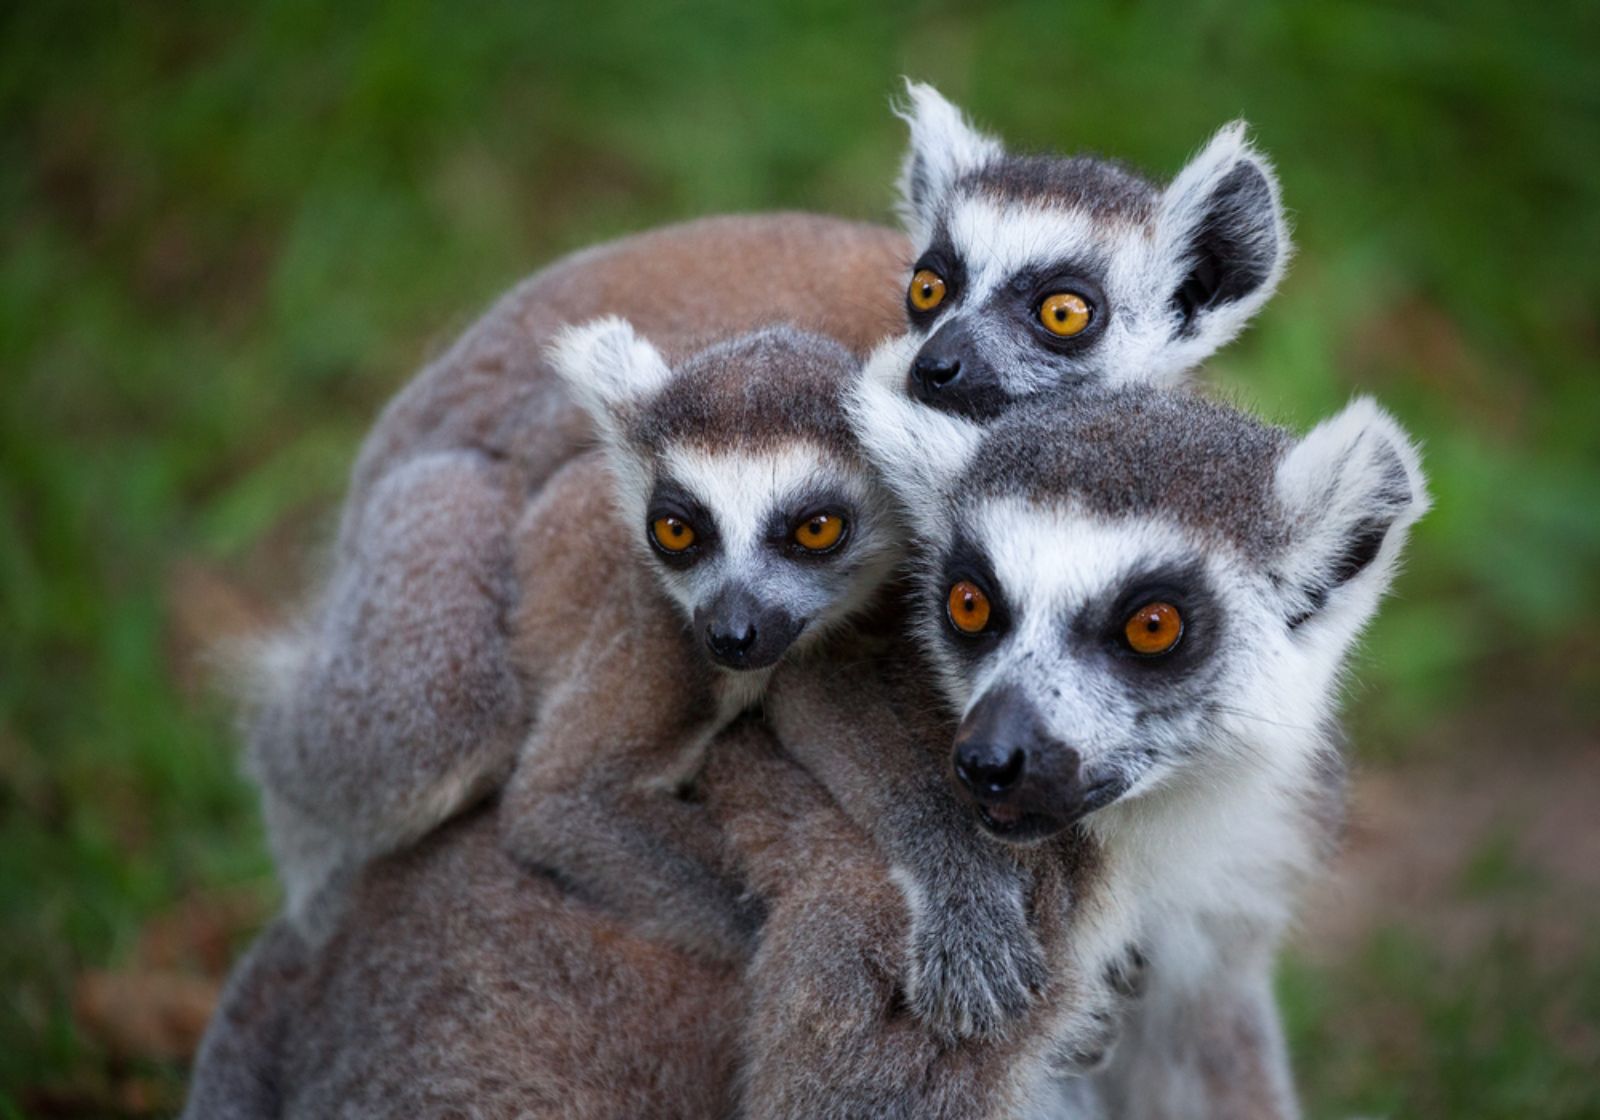 Ring tailed lemurs spotted on the grounds of Tsara Komba on the Nosy Be archipelago in Madagascar